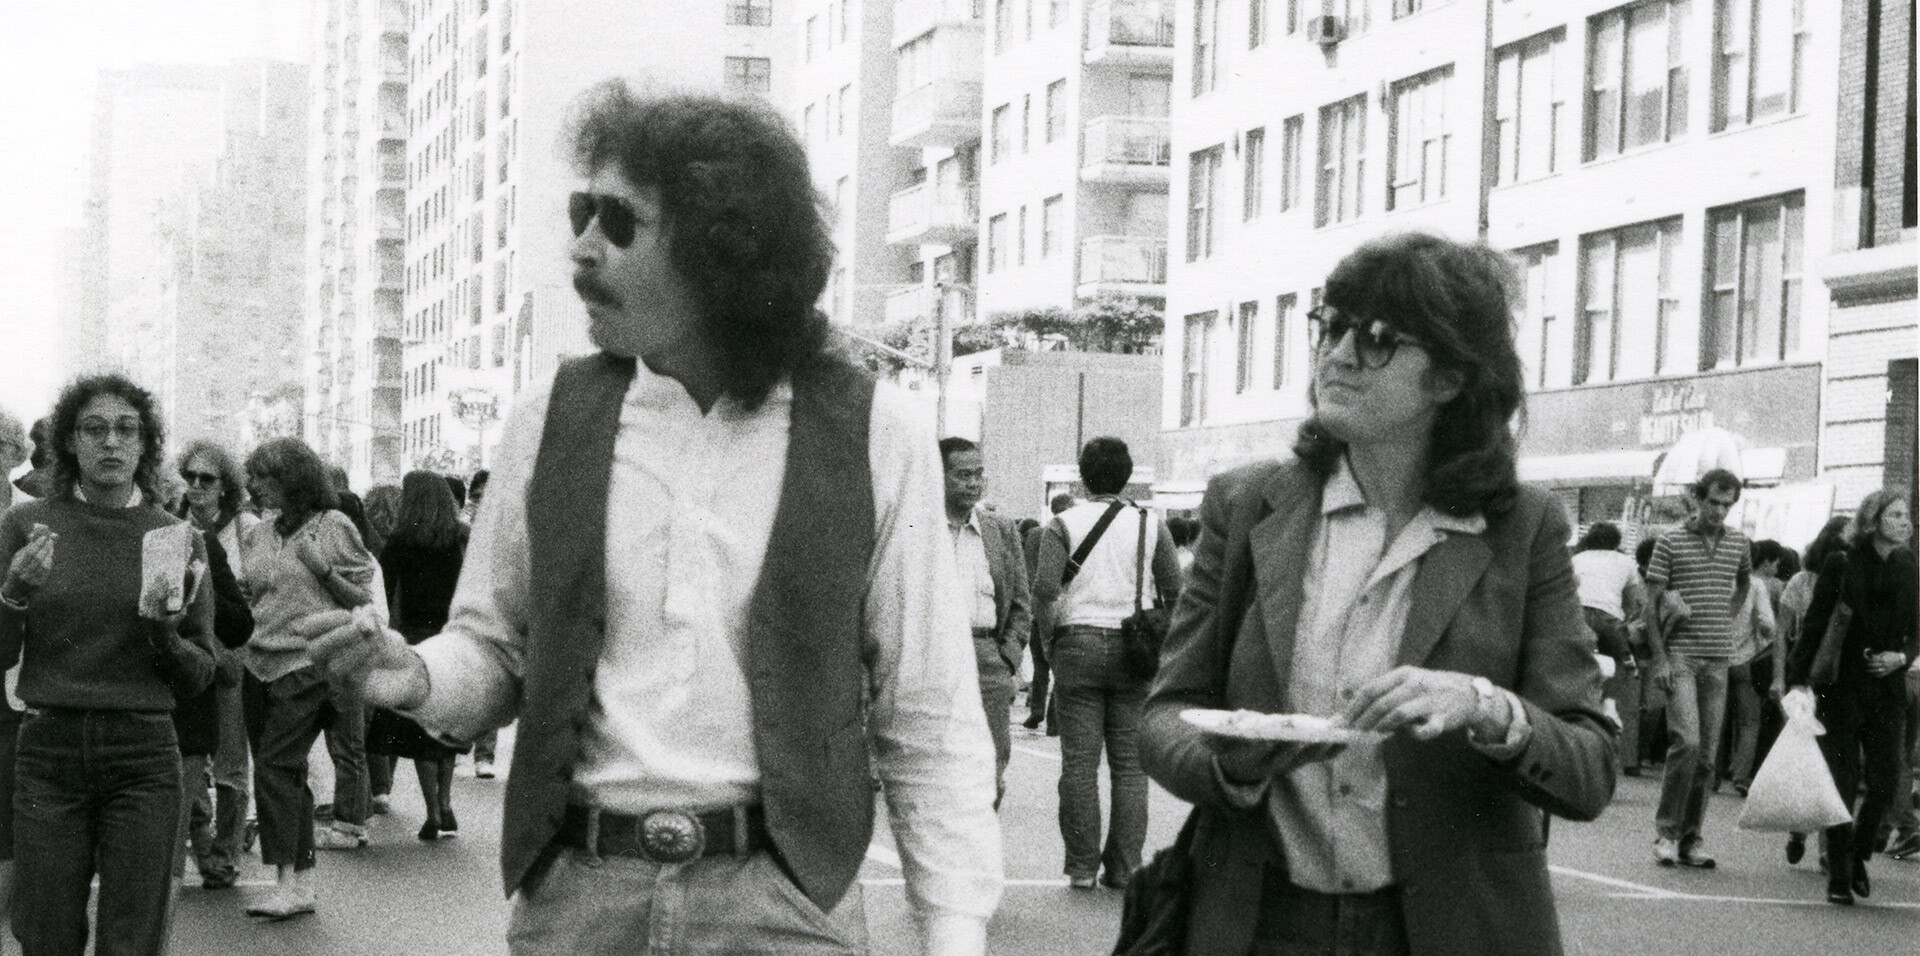 An archival photo of Doug Wheeler and Vija Celmins in New York, dated 1981.